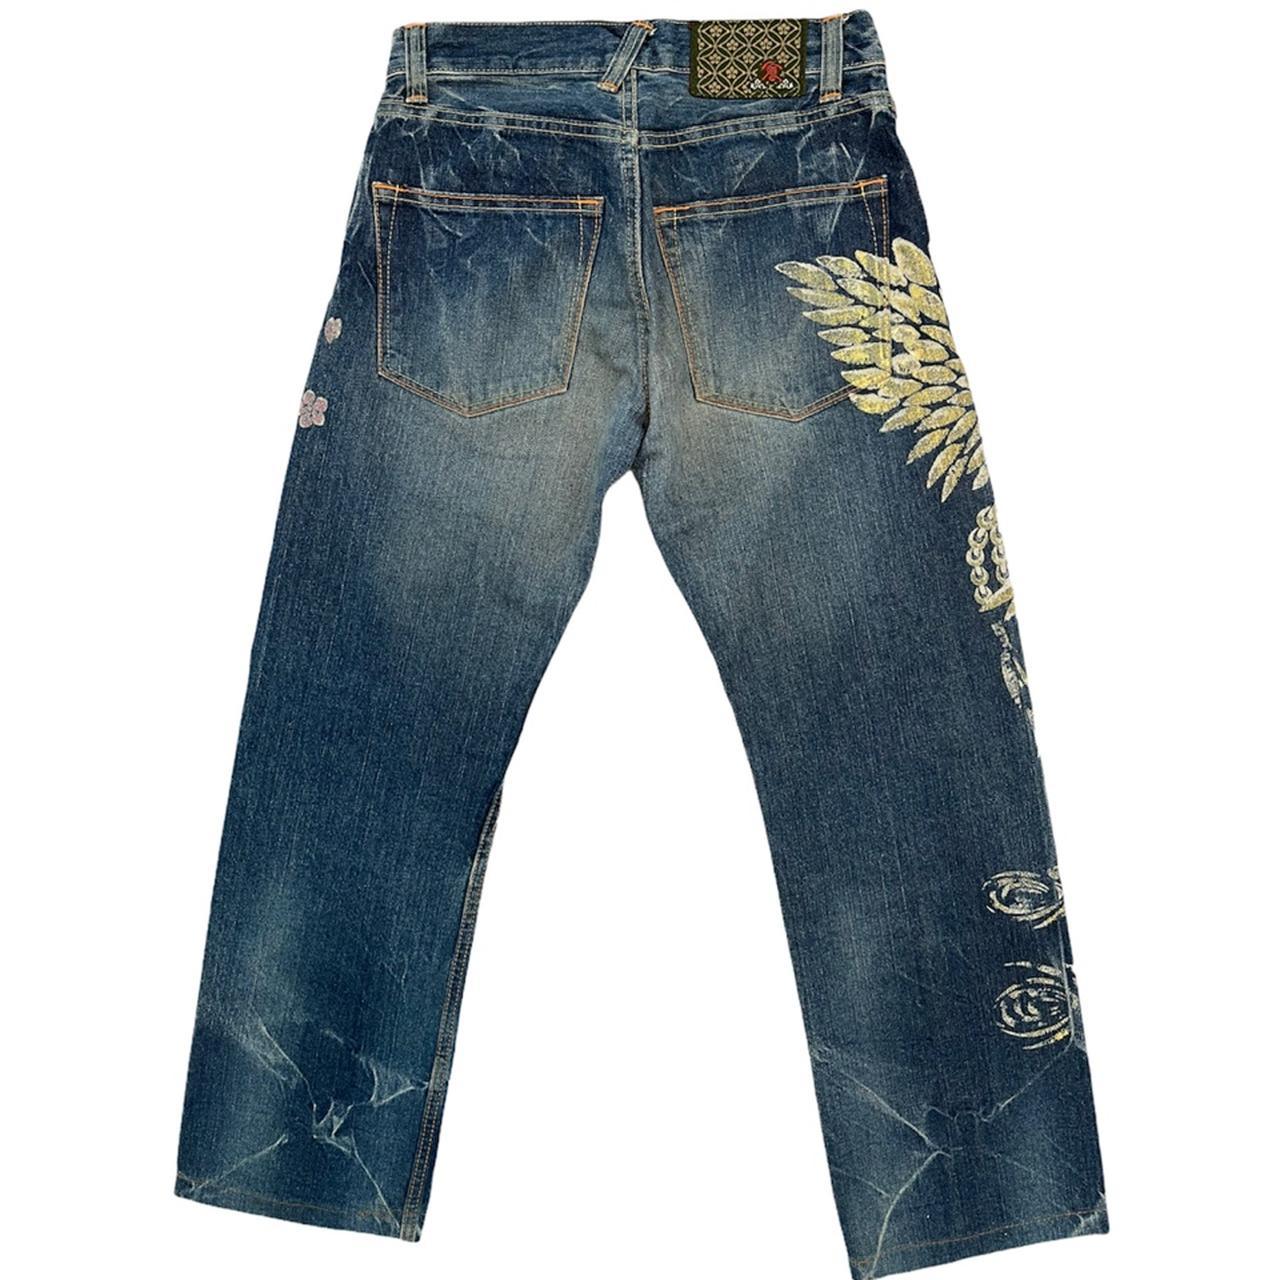 Japanese Phoenix Jeans - Known Source